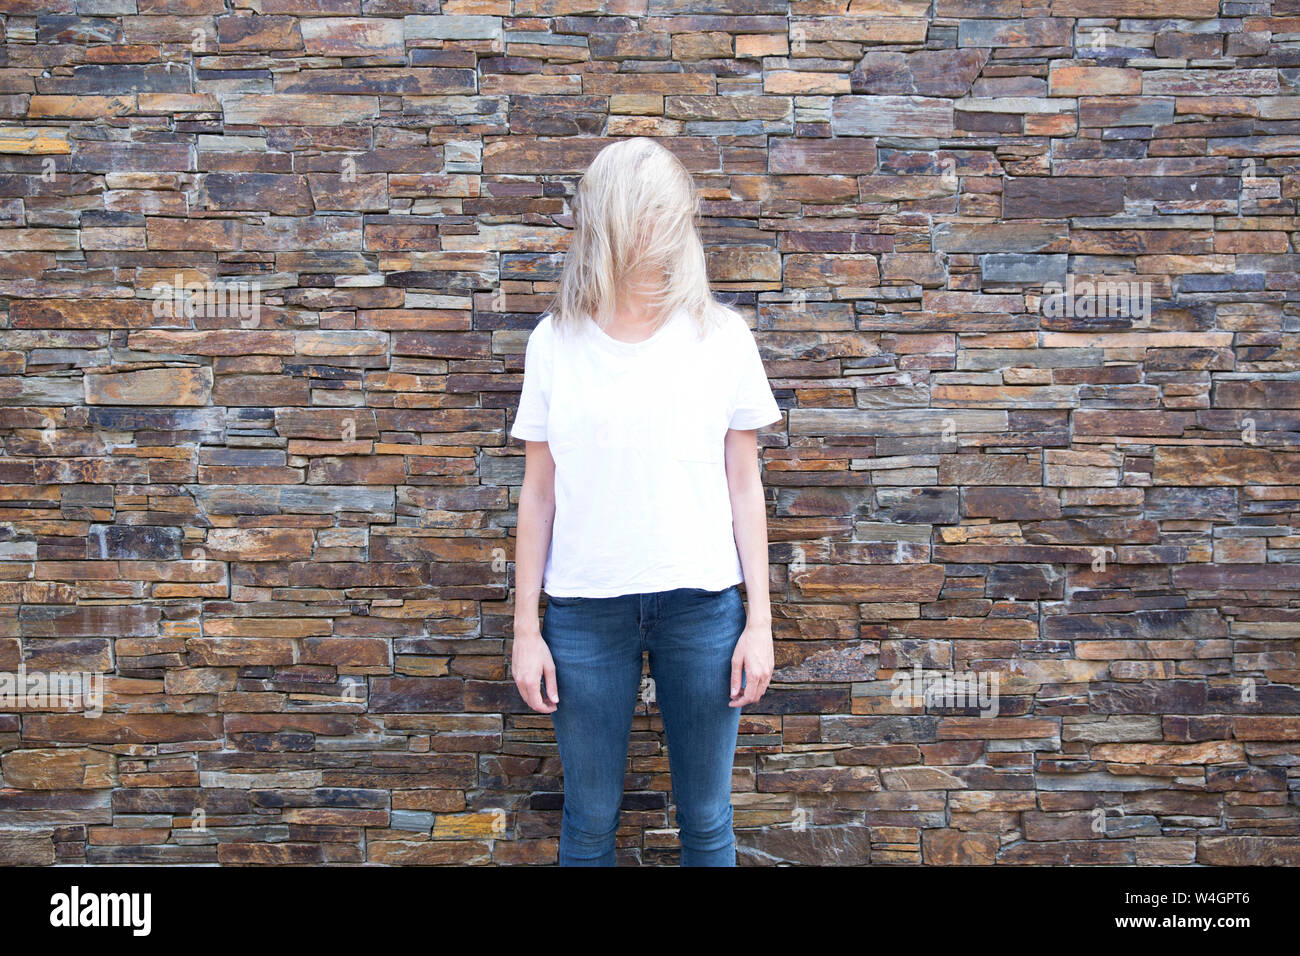 Woman in front of stone wall, obscured face Stock Photo